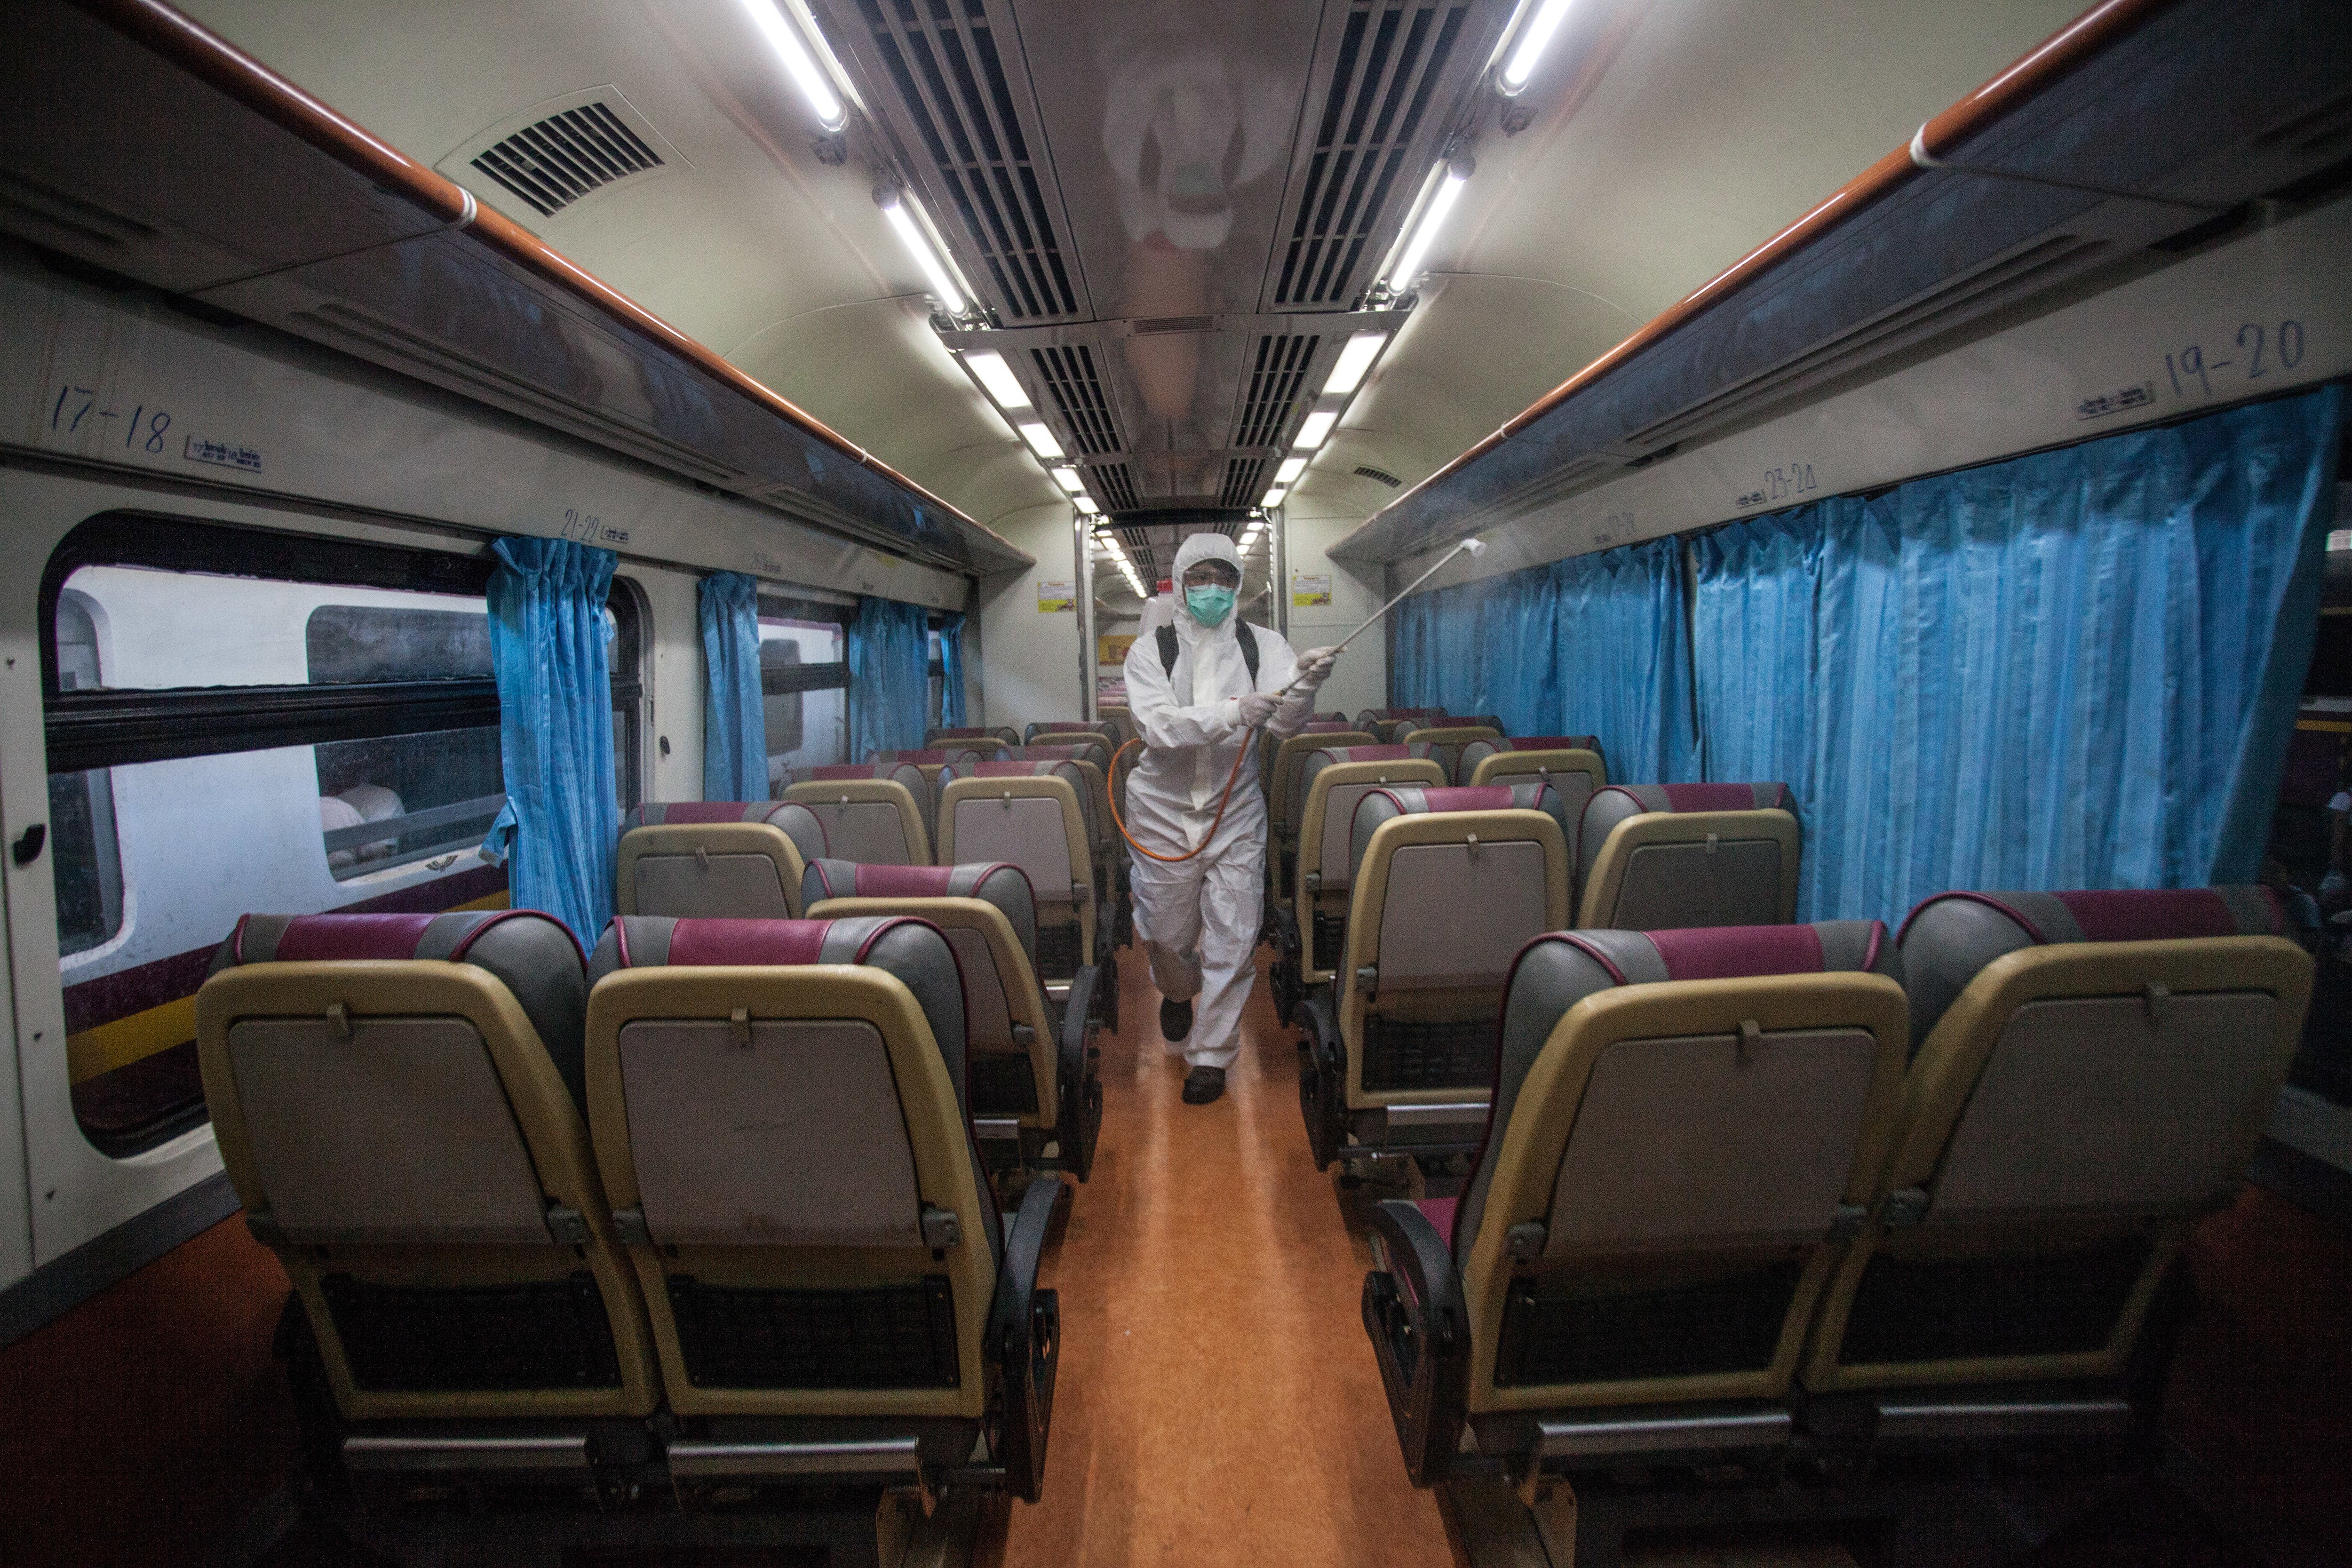 A worker disinfects a train at Hua Lamphong Railway Station in Bangkok on Wednesday, March 4.